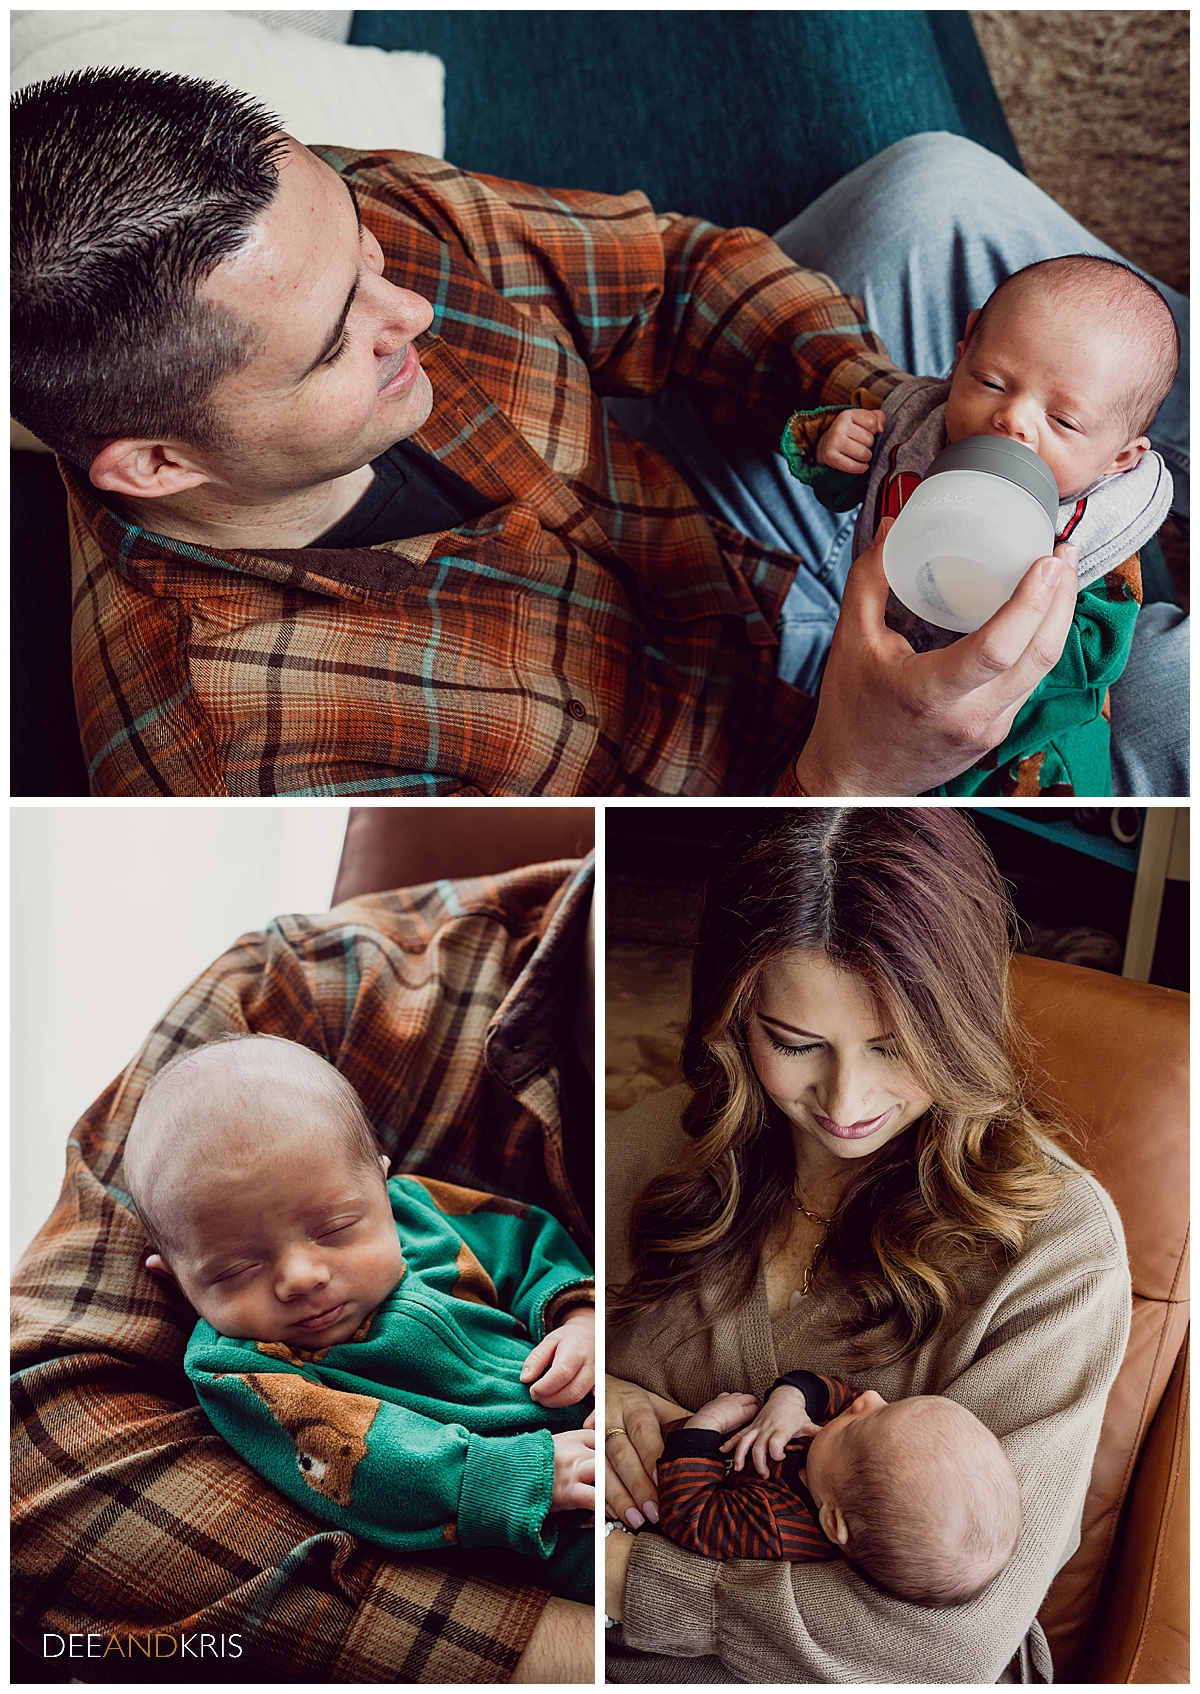 Three images: Top image of elevated view of dad feeding baby. Bottom left image close-up of baby in dad's arms. Bottom right image of mom looking at baby as she holds him.